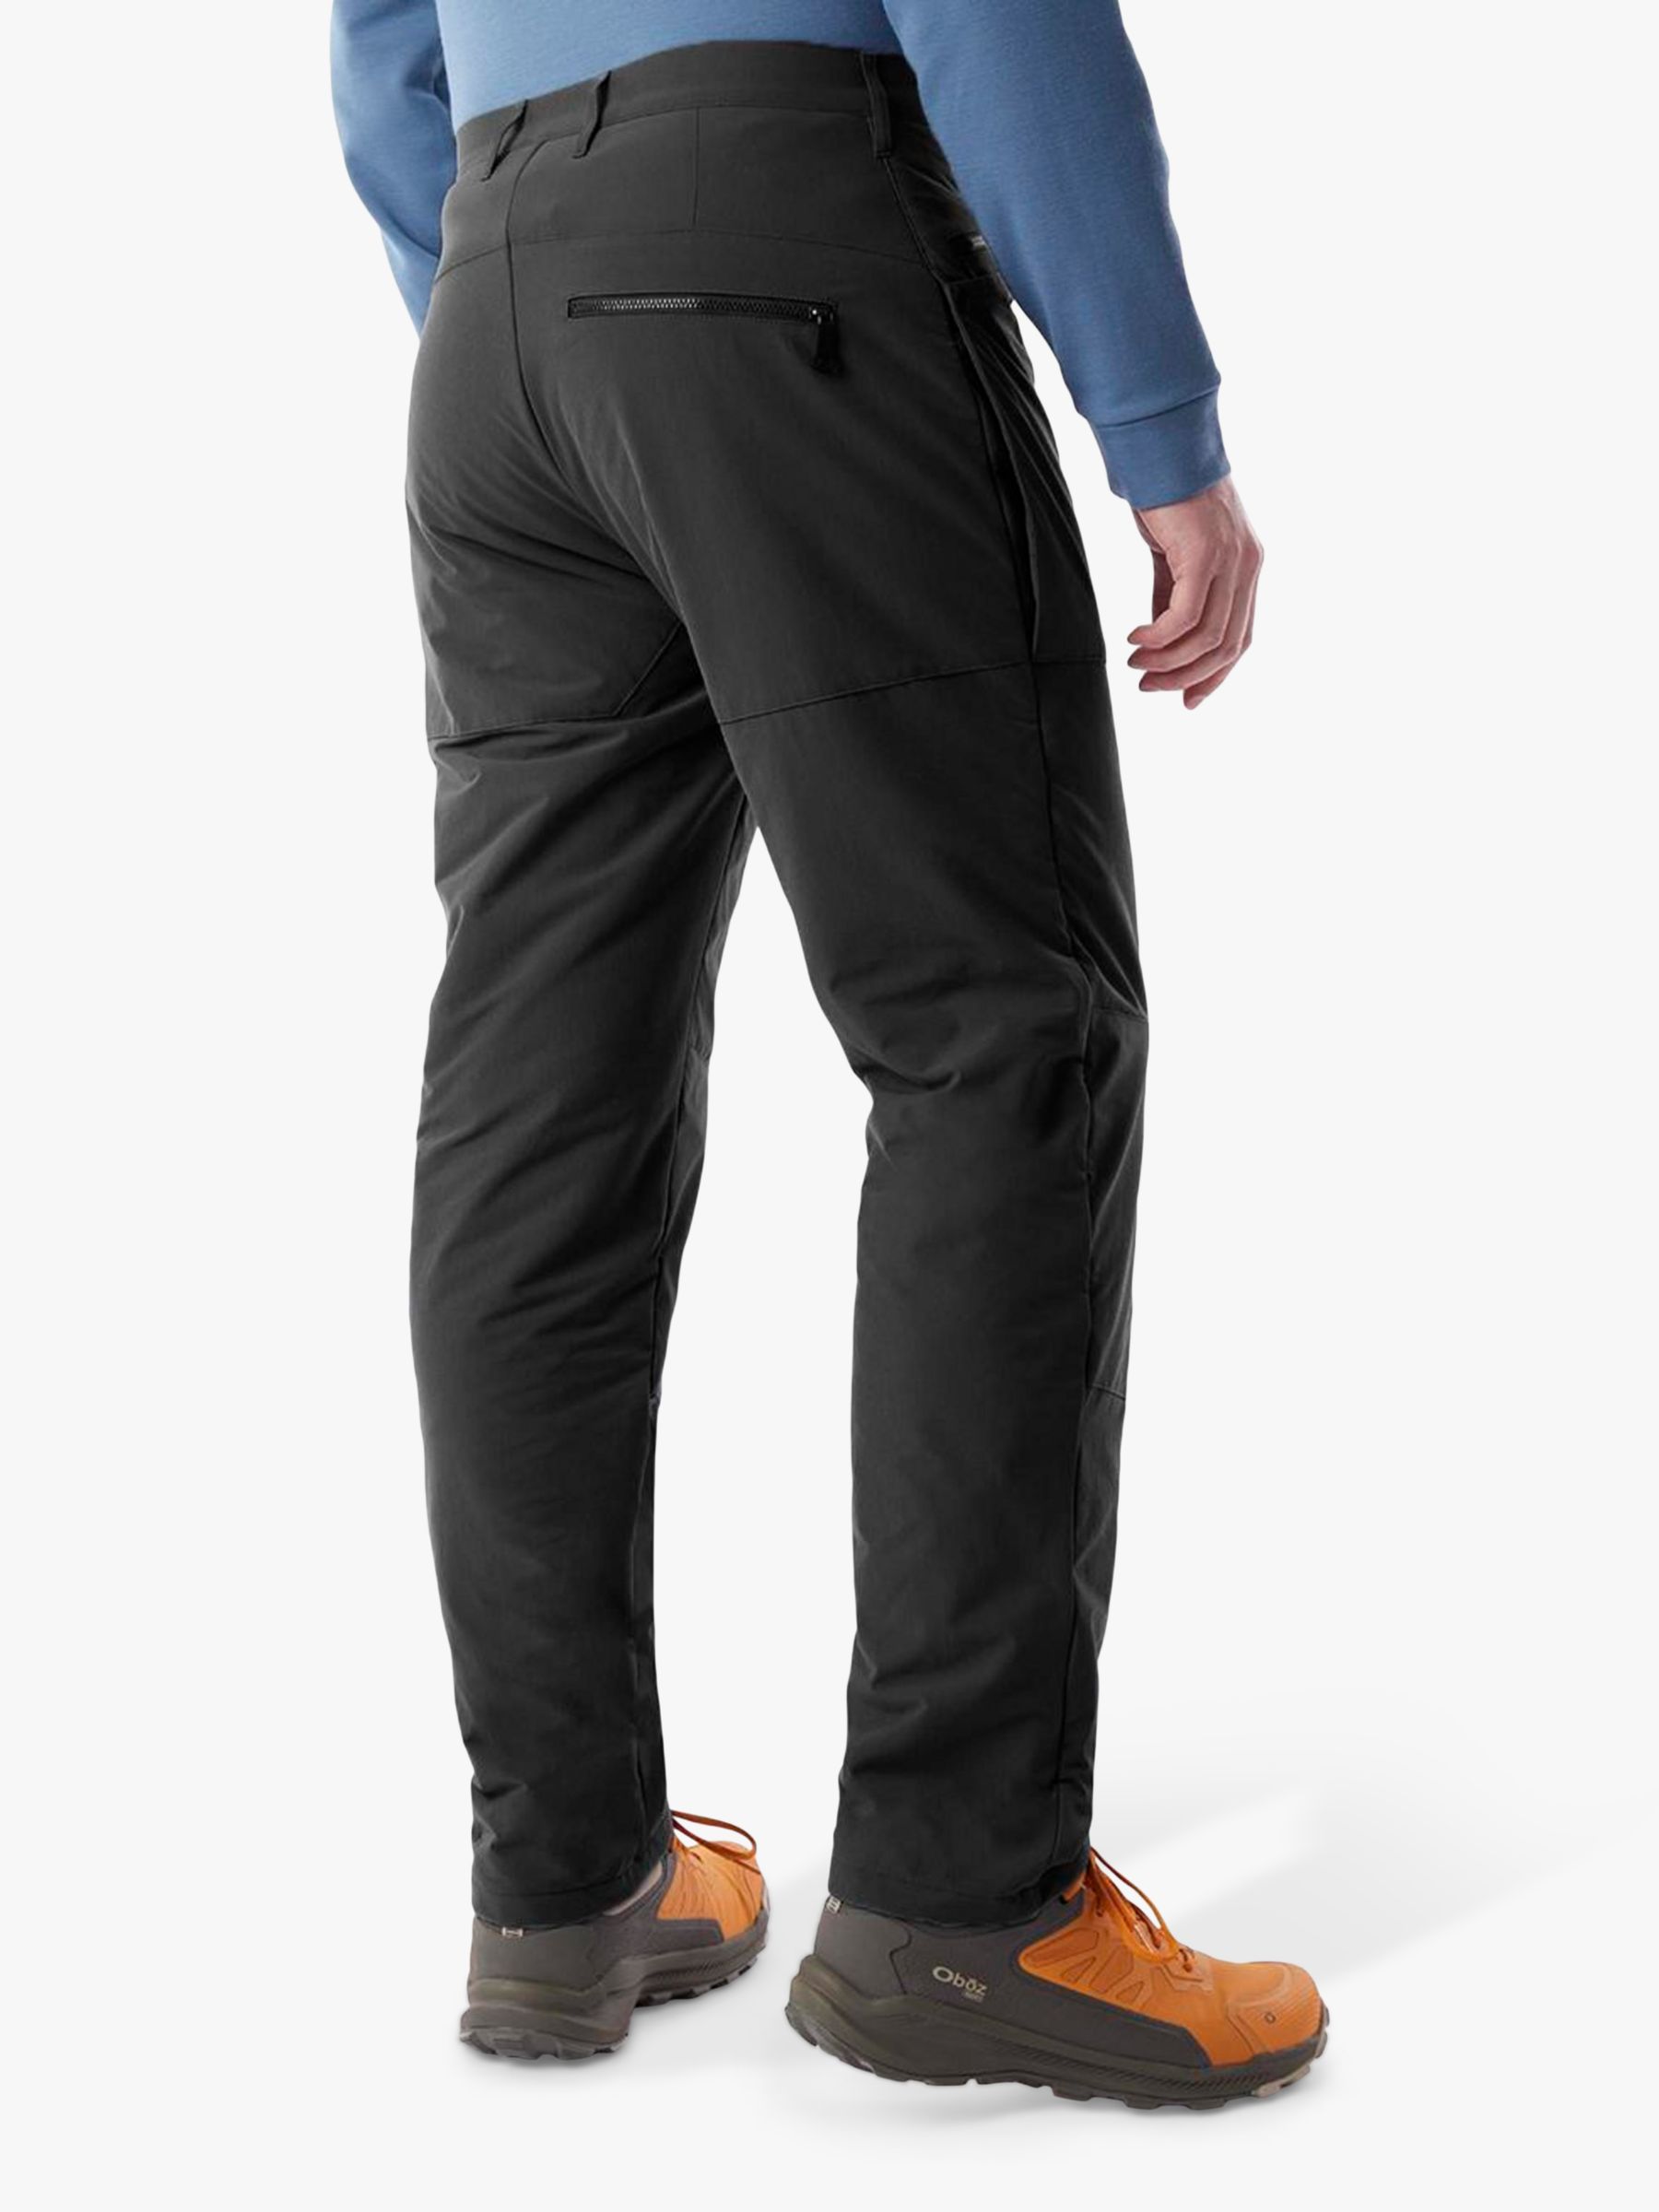 Rohan Stretch Bags Walking Trousers, Black at John Lewis & Partners